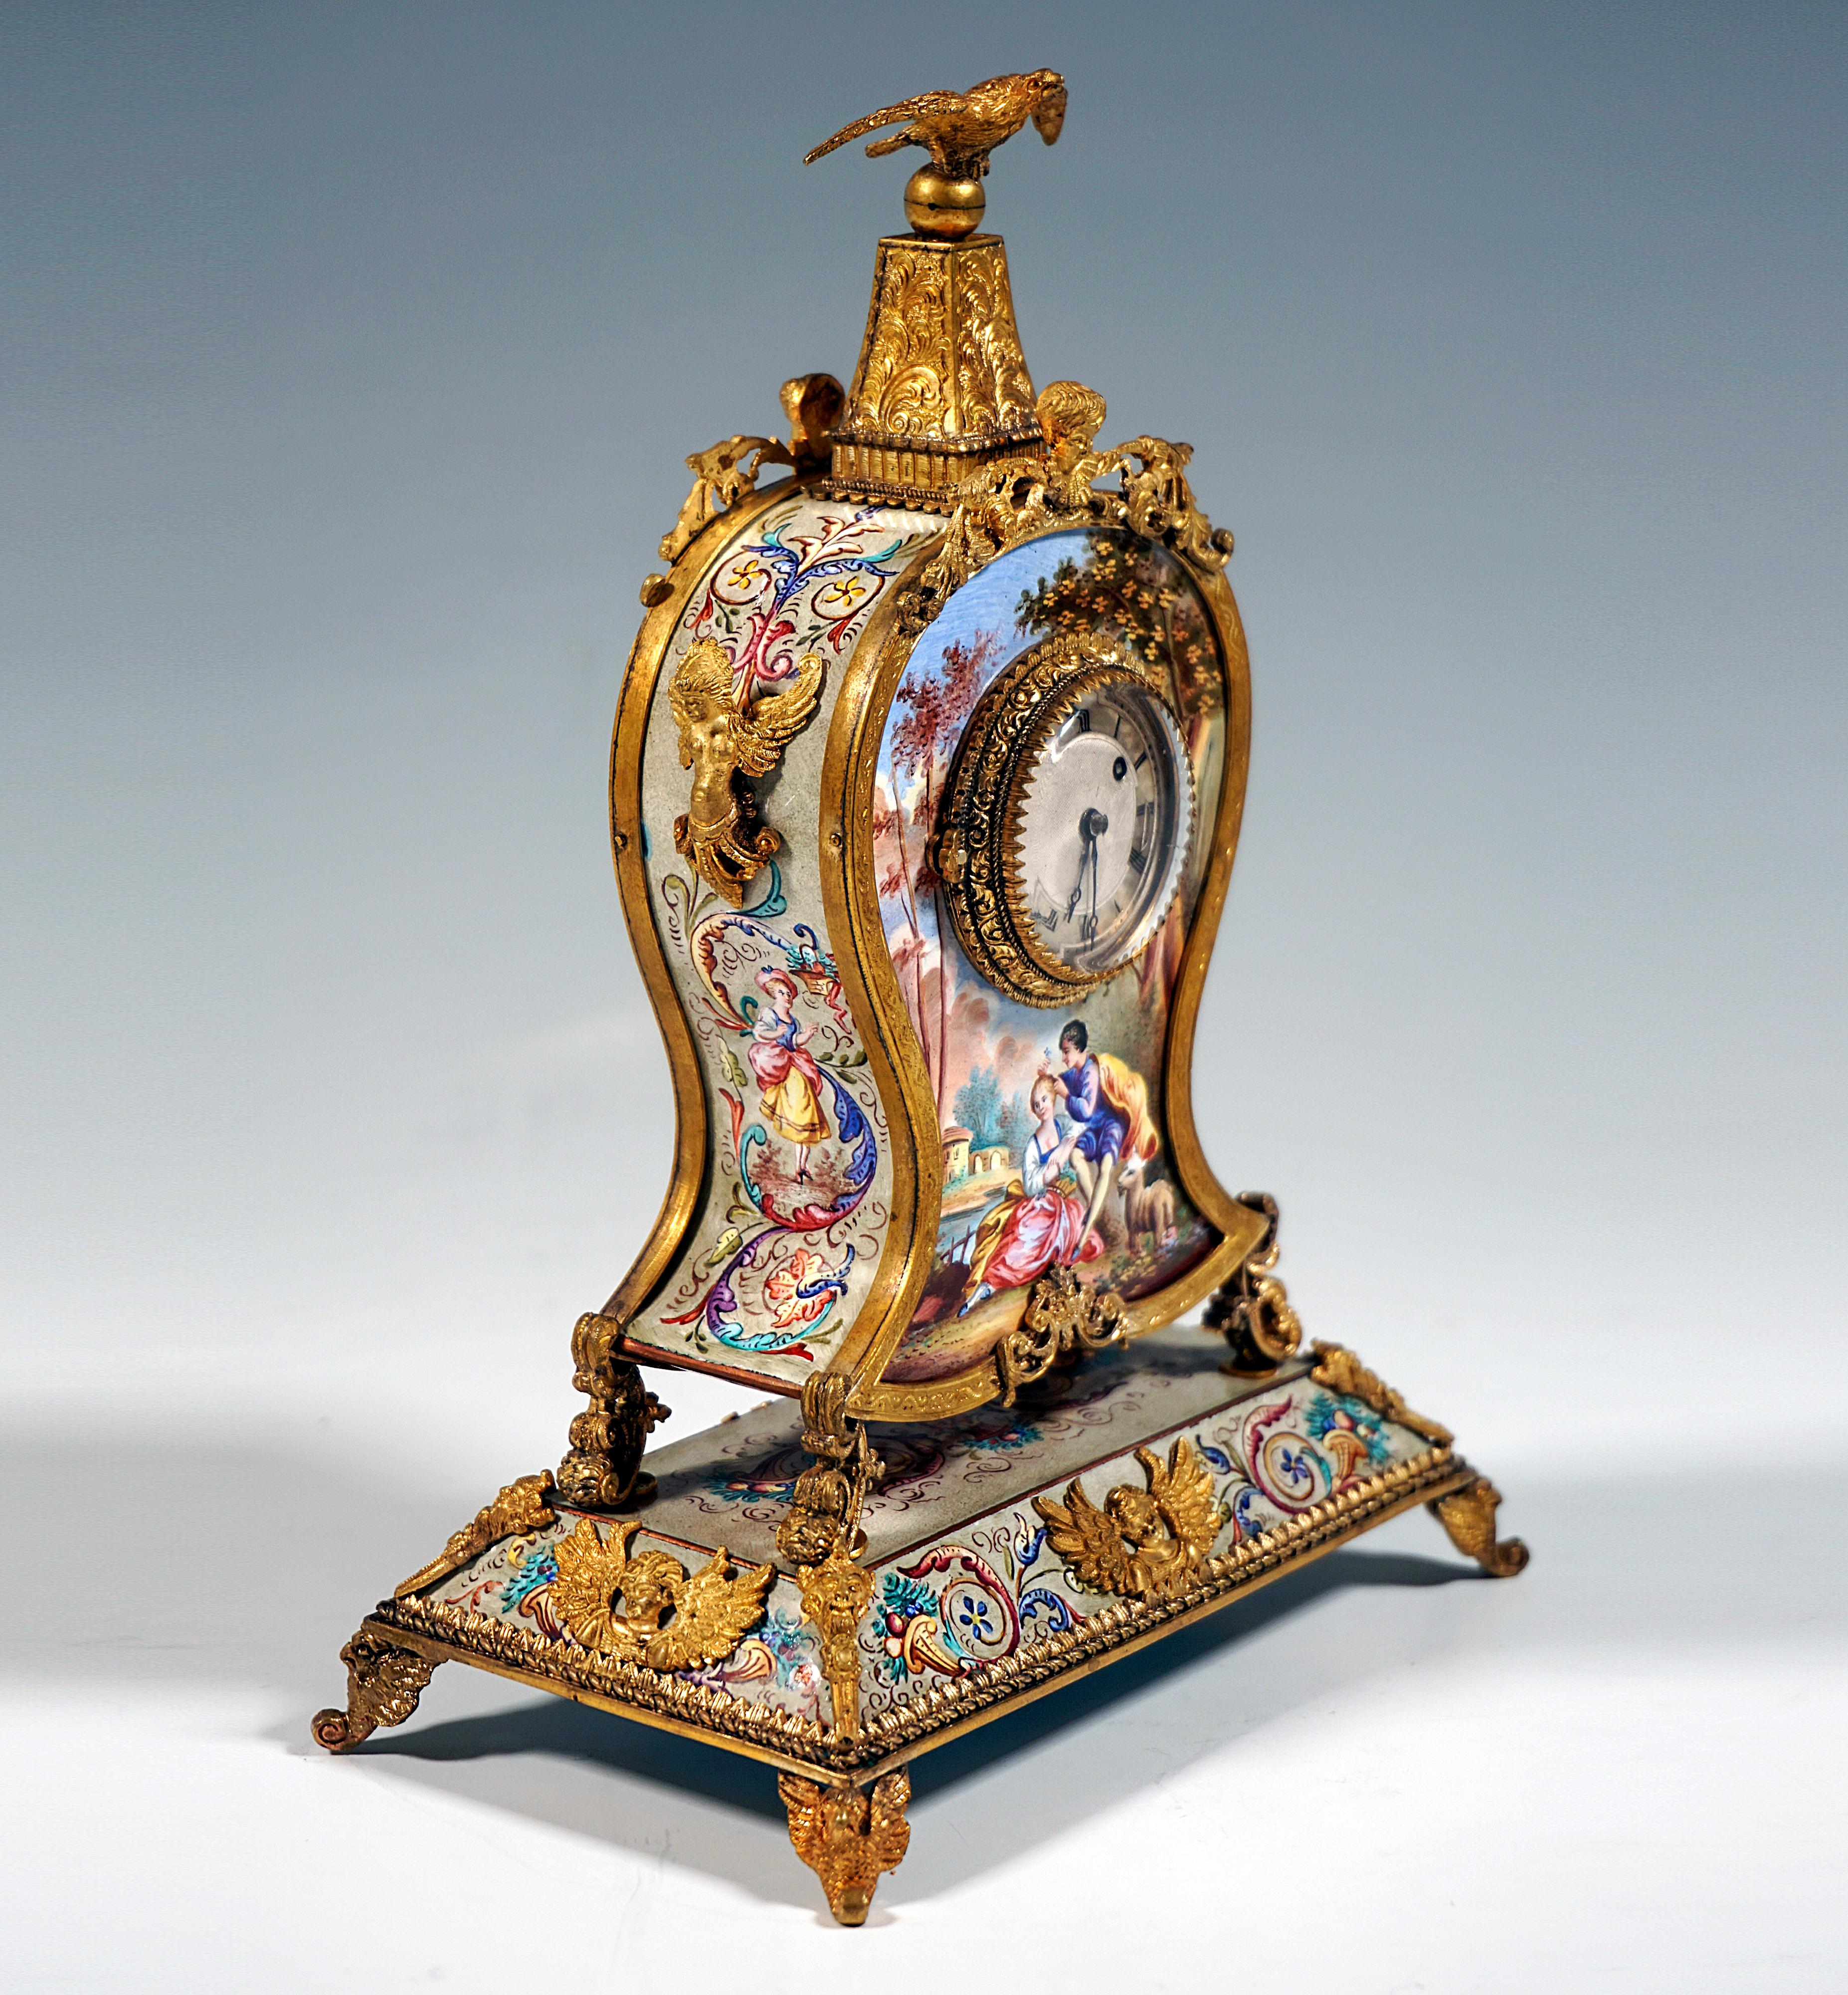 Elaborately decorated table clock in excellent condition:
Actual, round clock case on rocaille feet mounted on a bevelled pedestal with four feet in the form of fantasy bird busts with volutes, all components made of silver, the surfaces either gilt